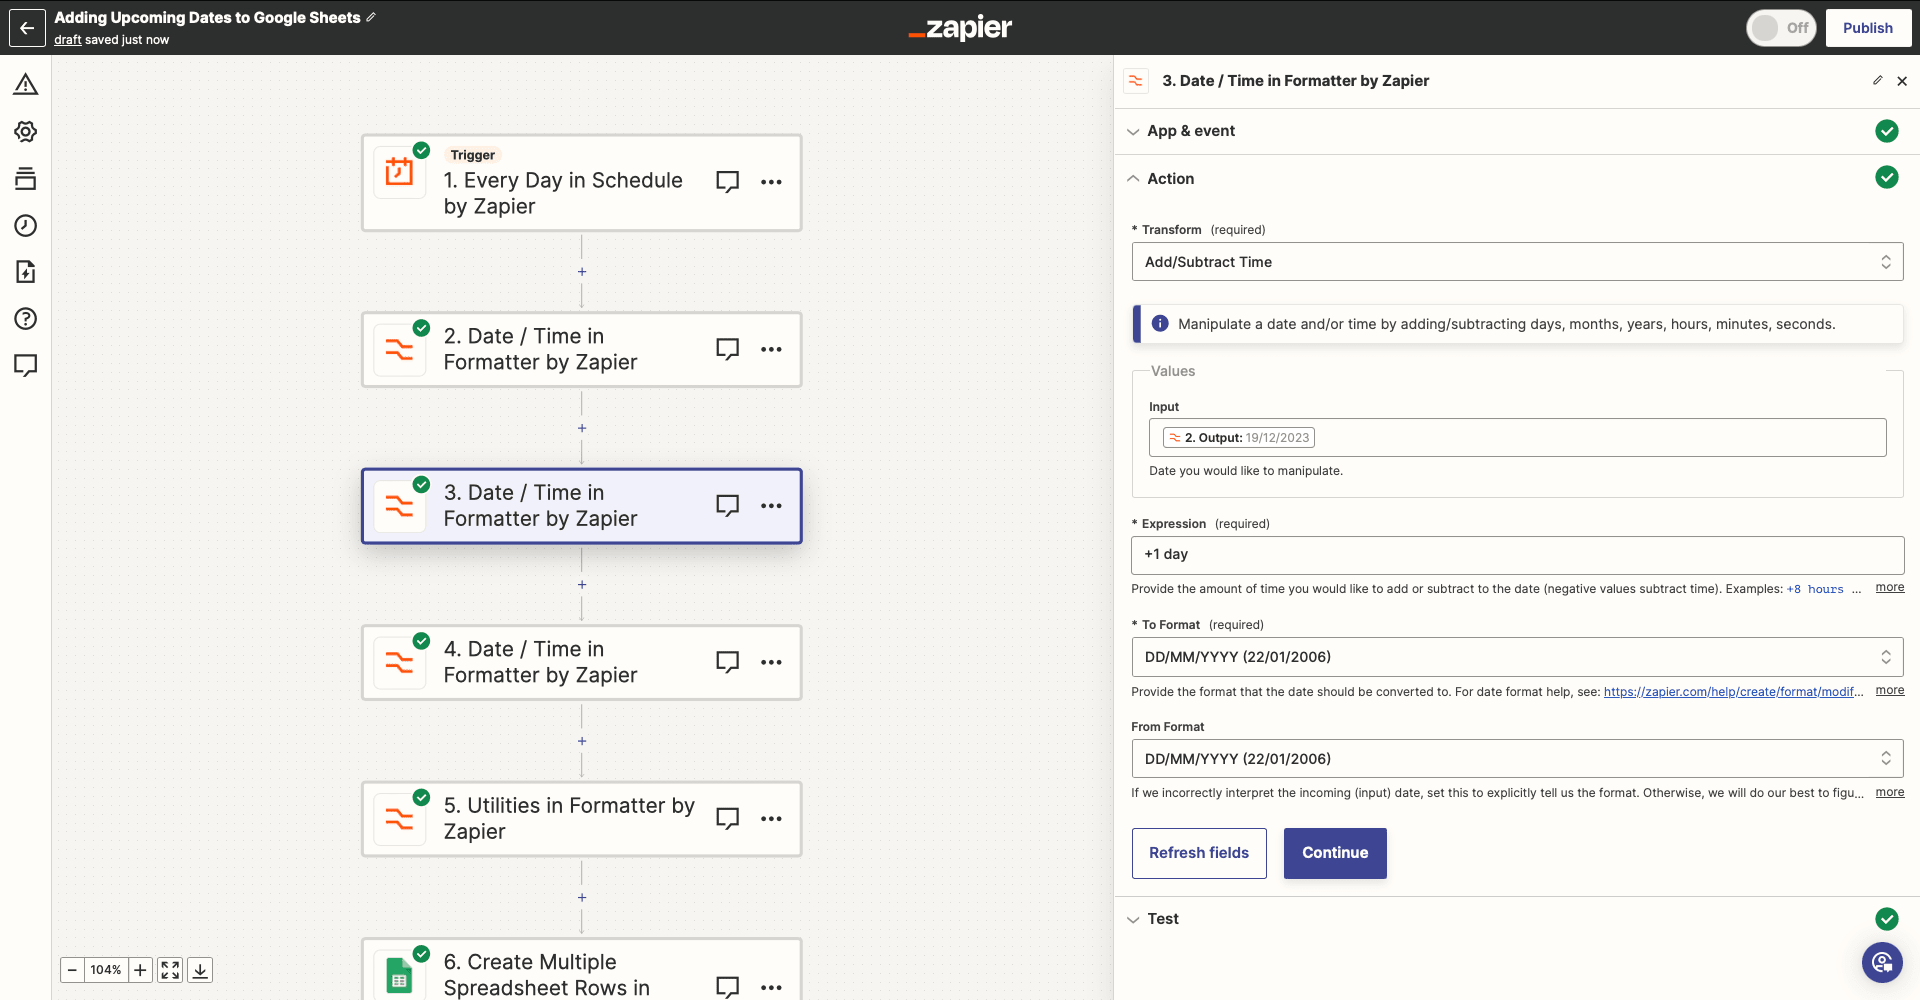 Screenshot of Zapier Date / Time in Formatter by Zapier action setup